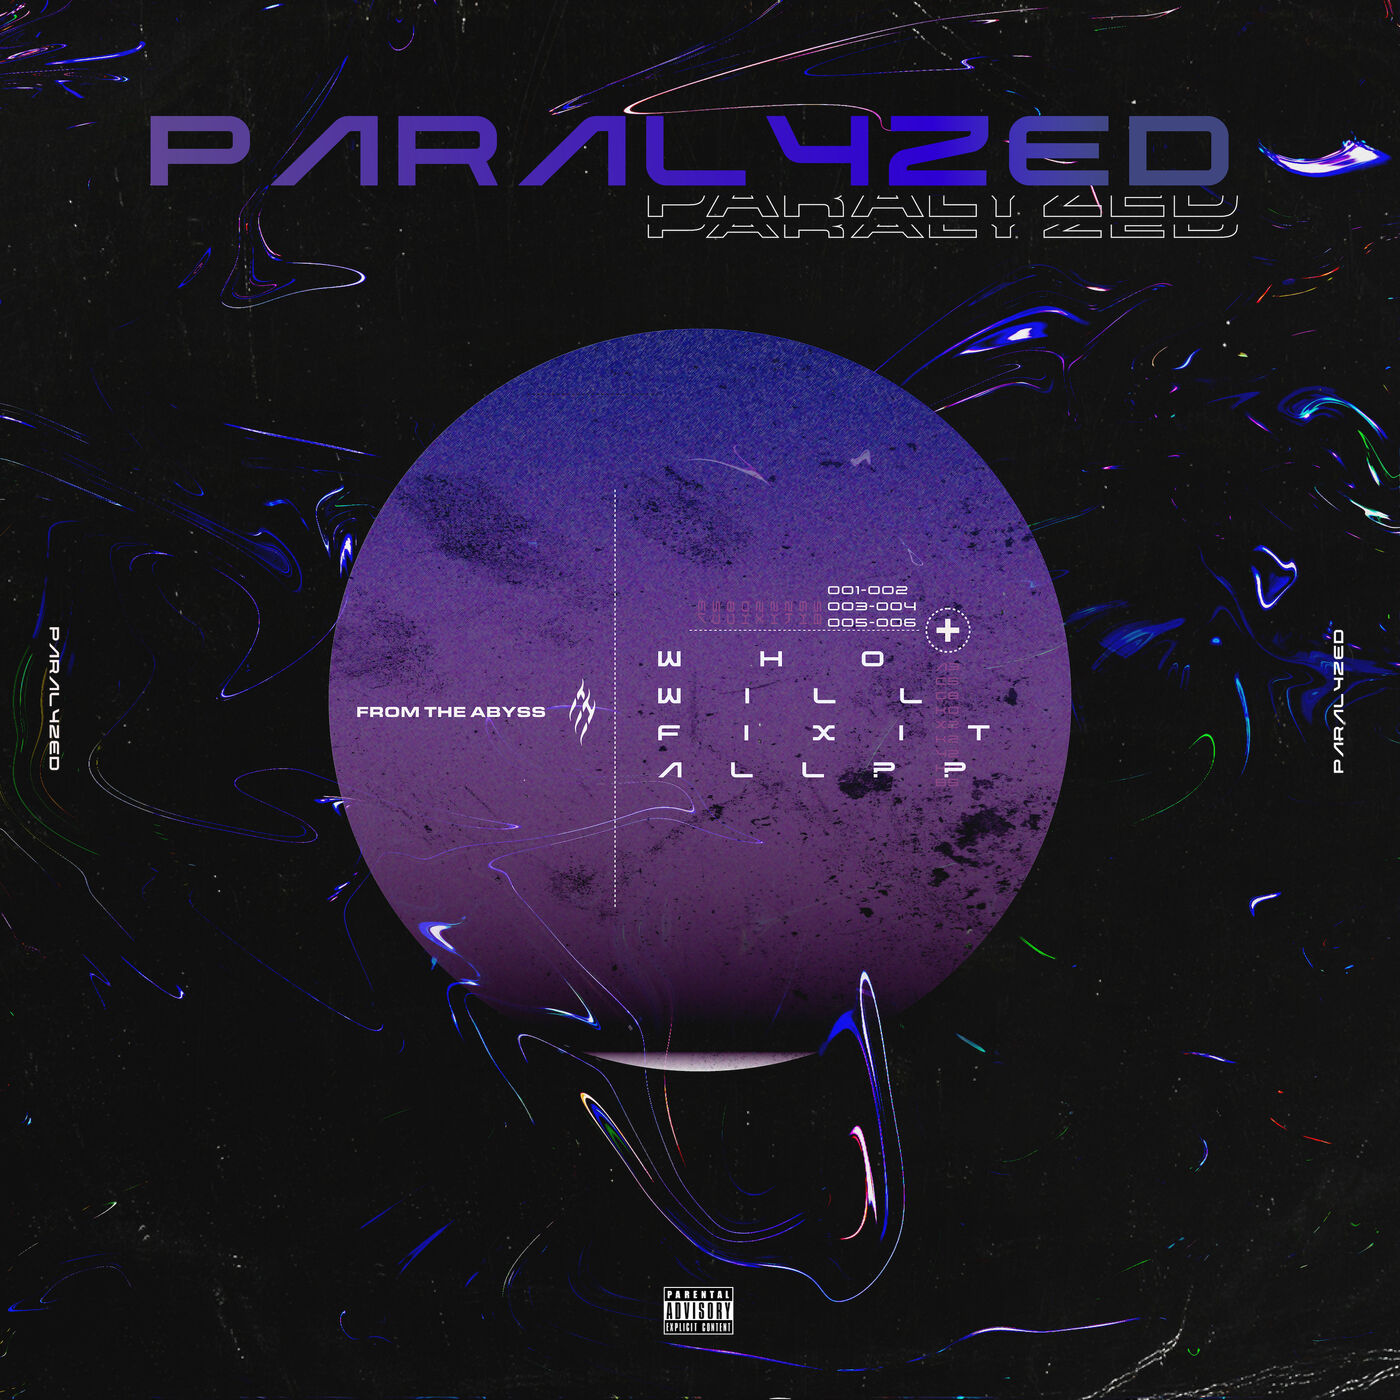 From the Abyss - PARALYZED [single] (2020) » CORE RADIO